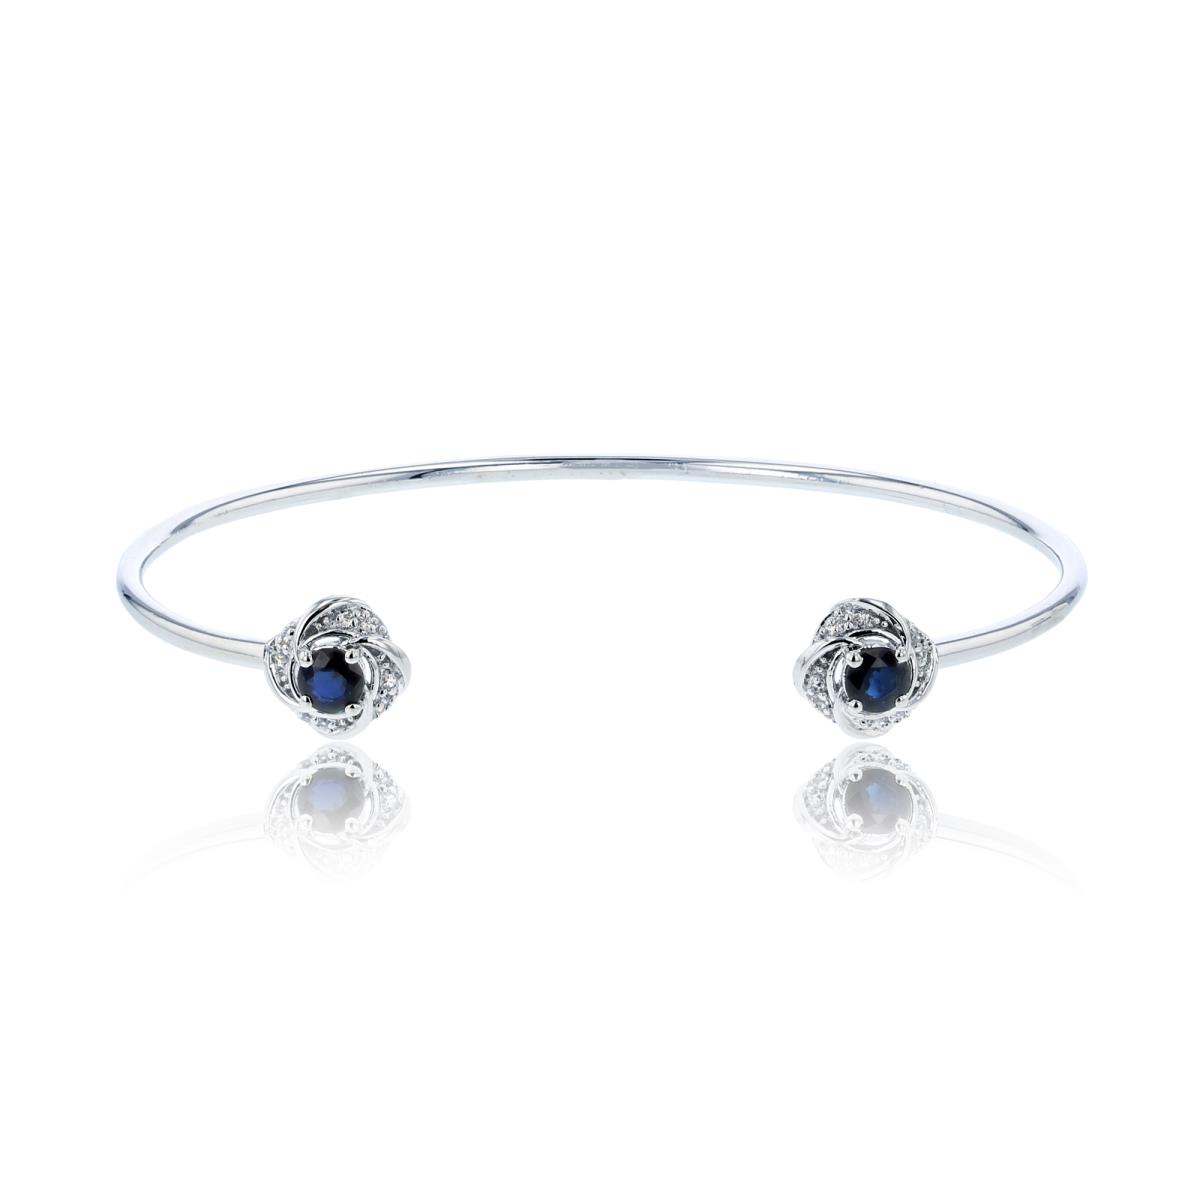 10k White Gold & 0.06 CTTW Rd Diamond & Sapphire Knot Sides Open Wire Bangle